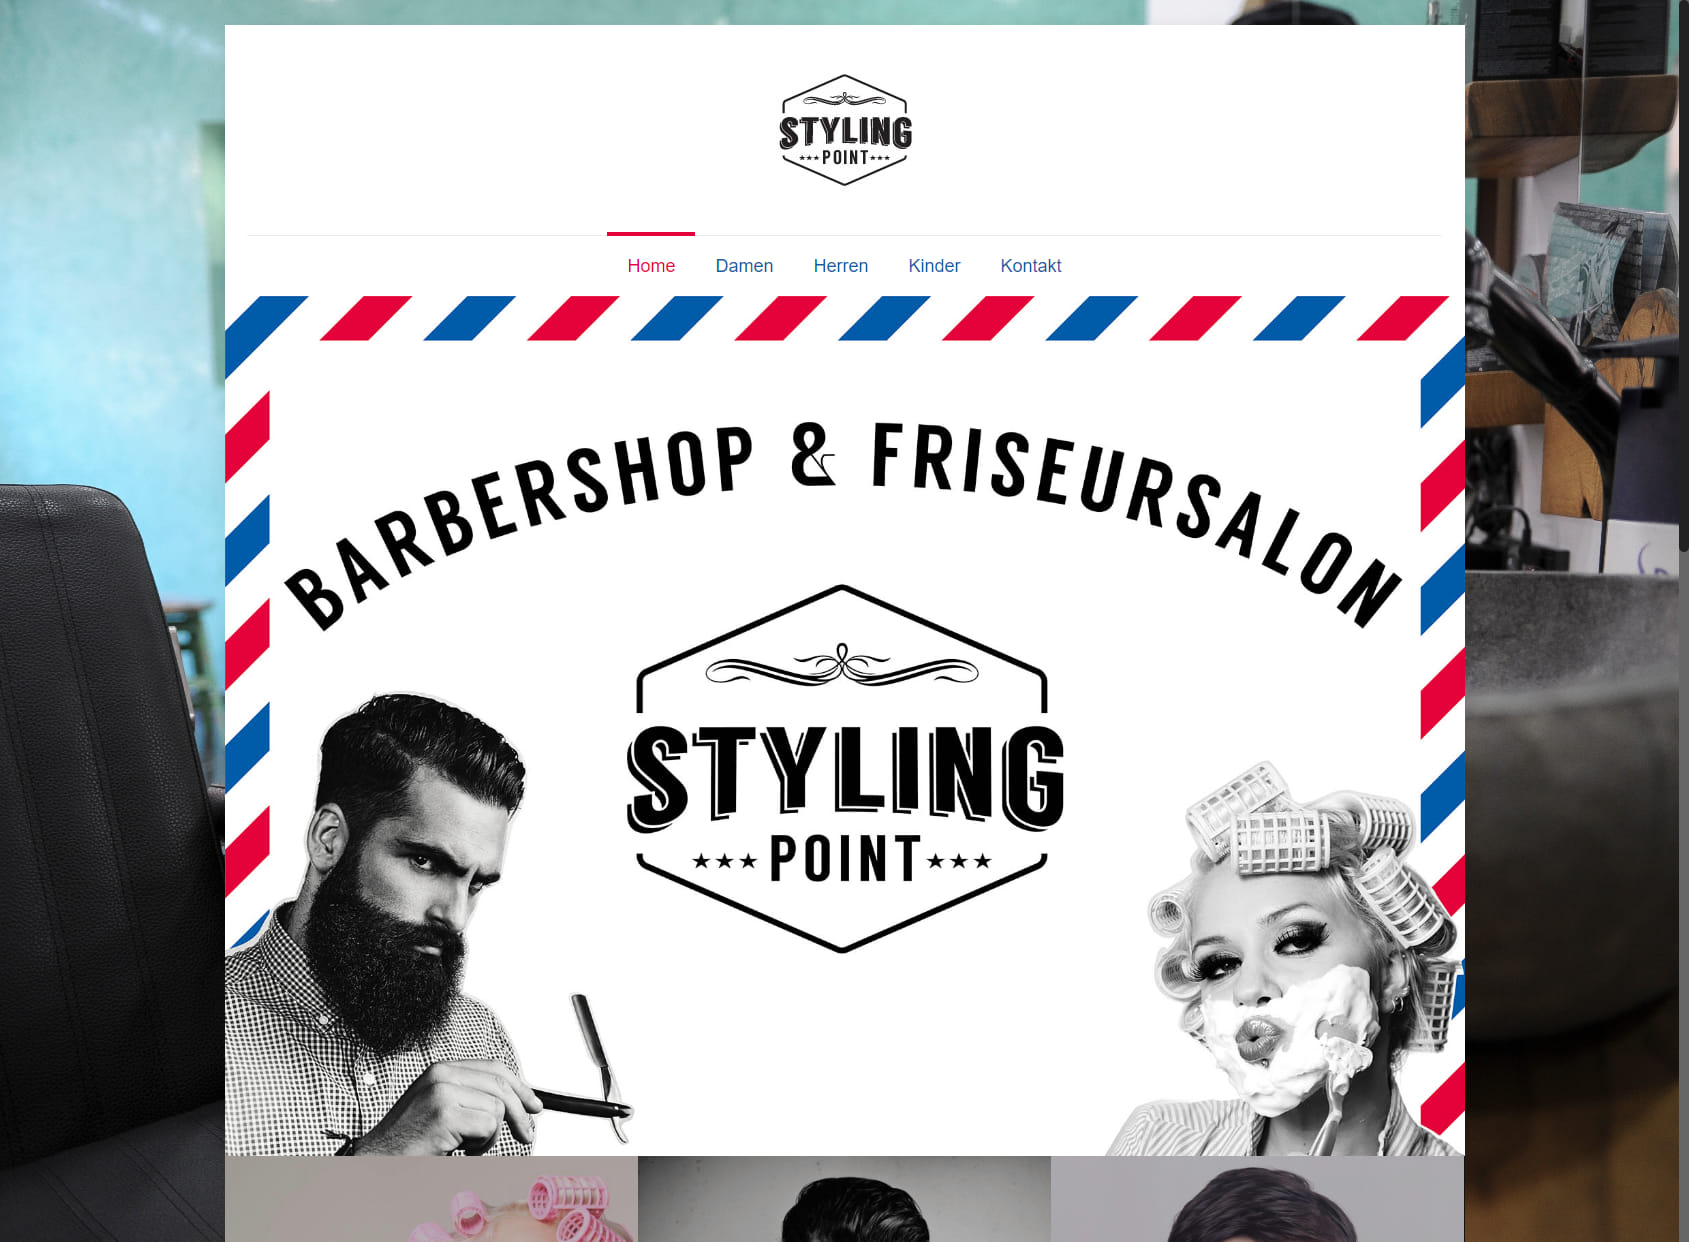 Styling by Orient - Barbershop